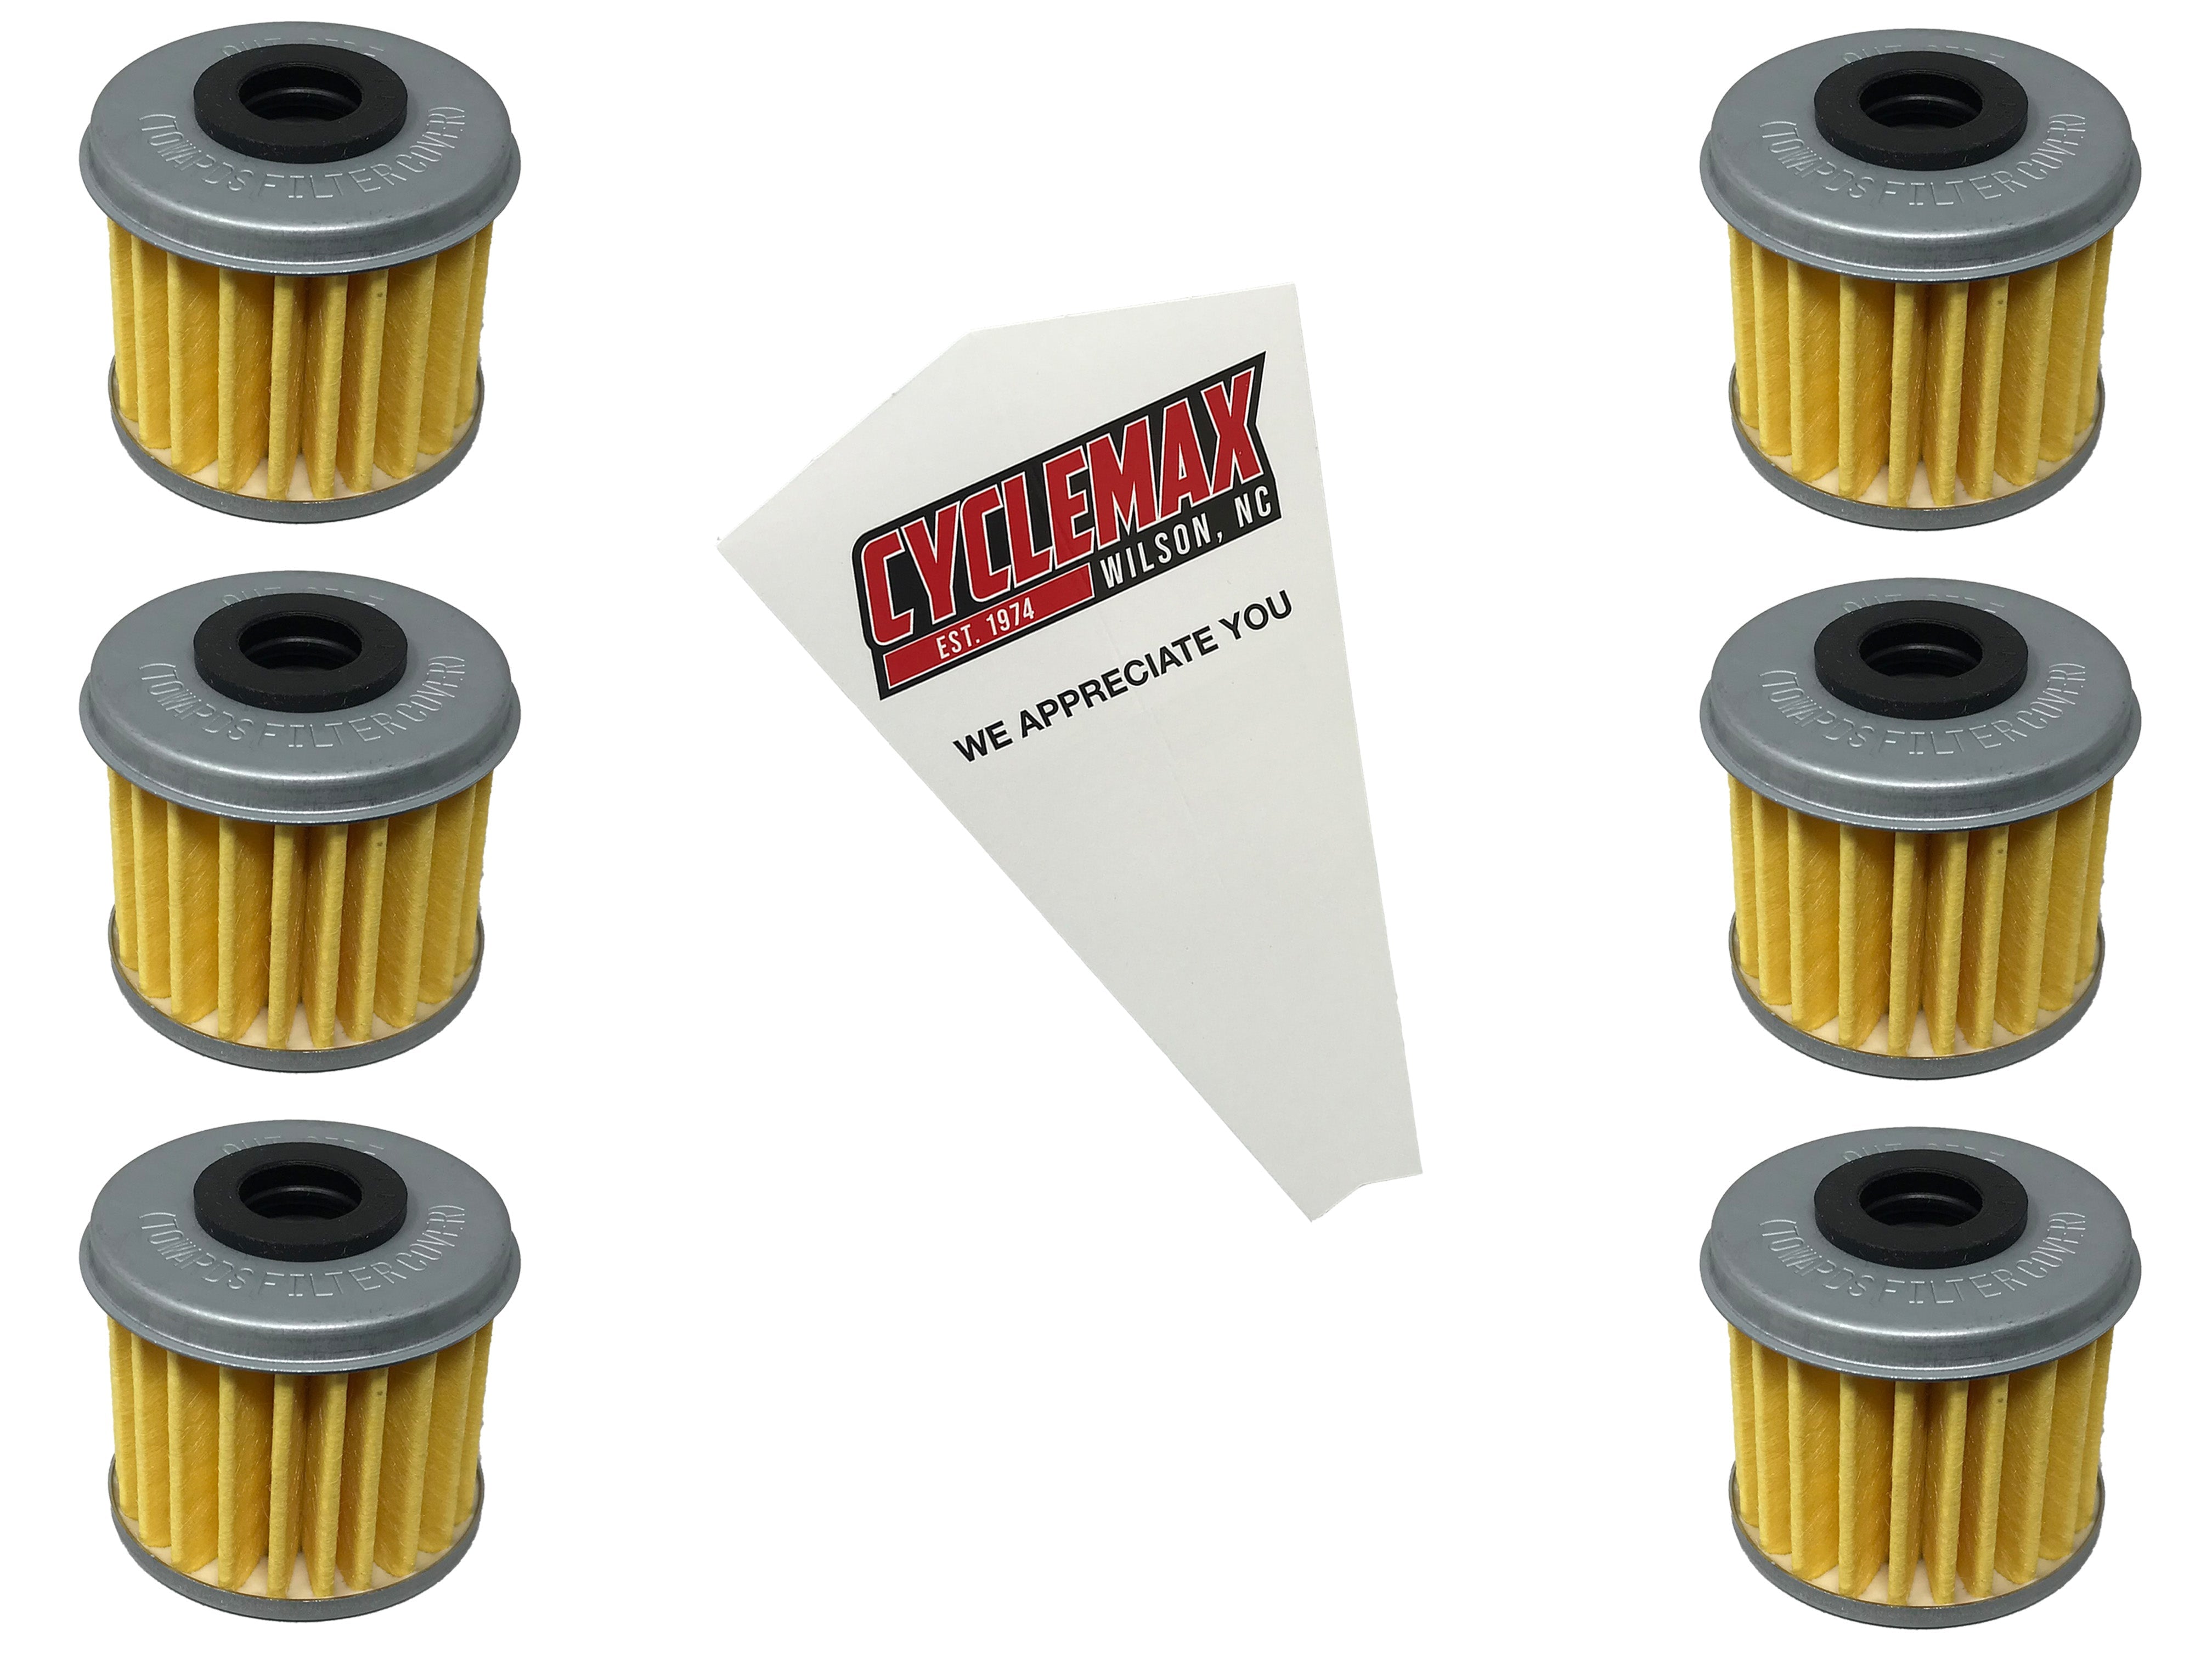 Cyclemax Six Pack for Honda Oil Filter 15412-MEN-671 Contains Six Filters and a Funnel